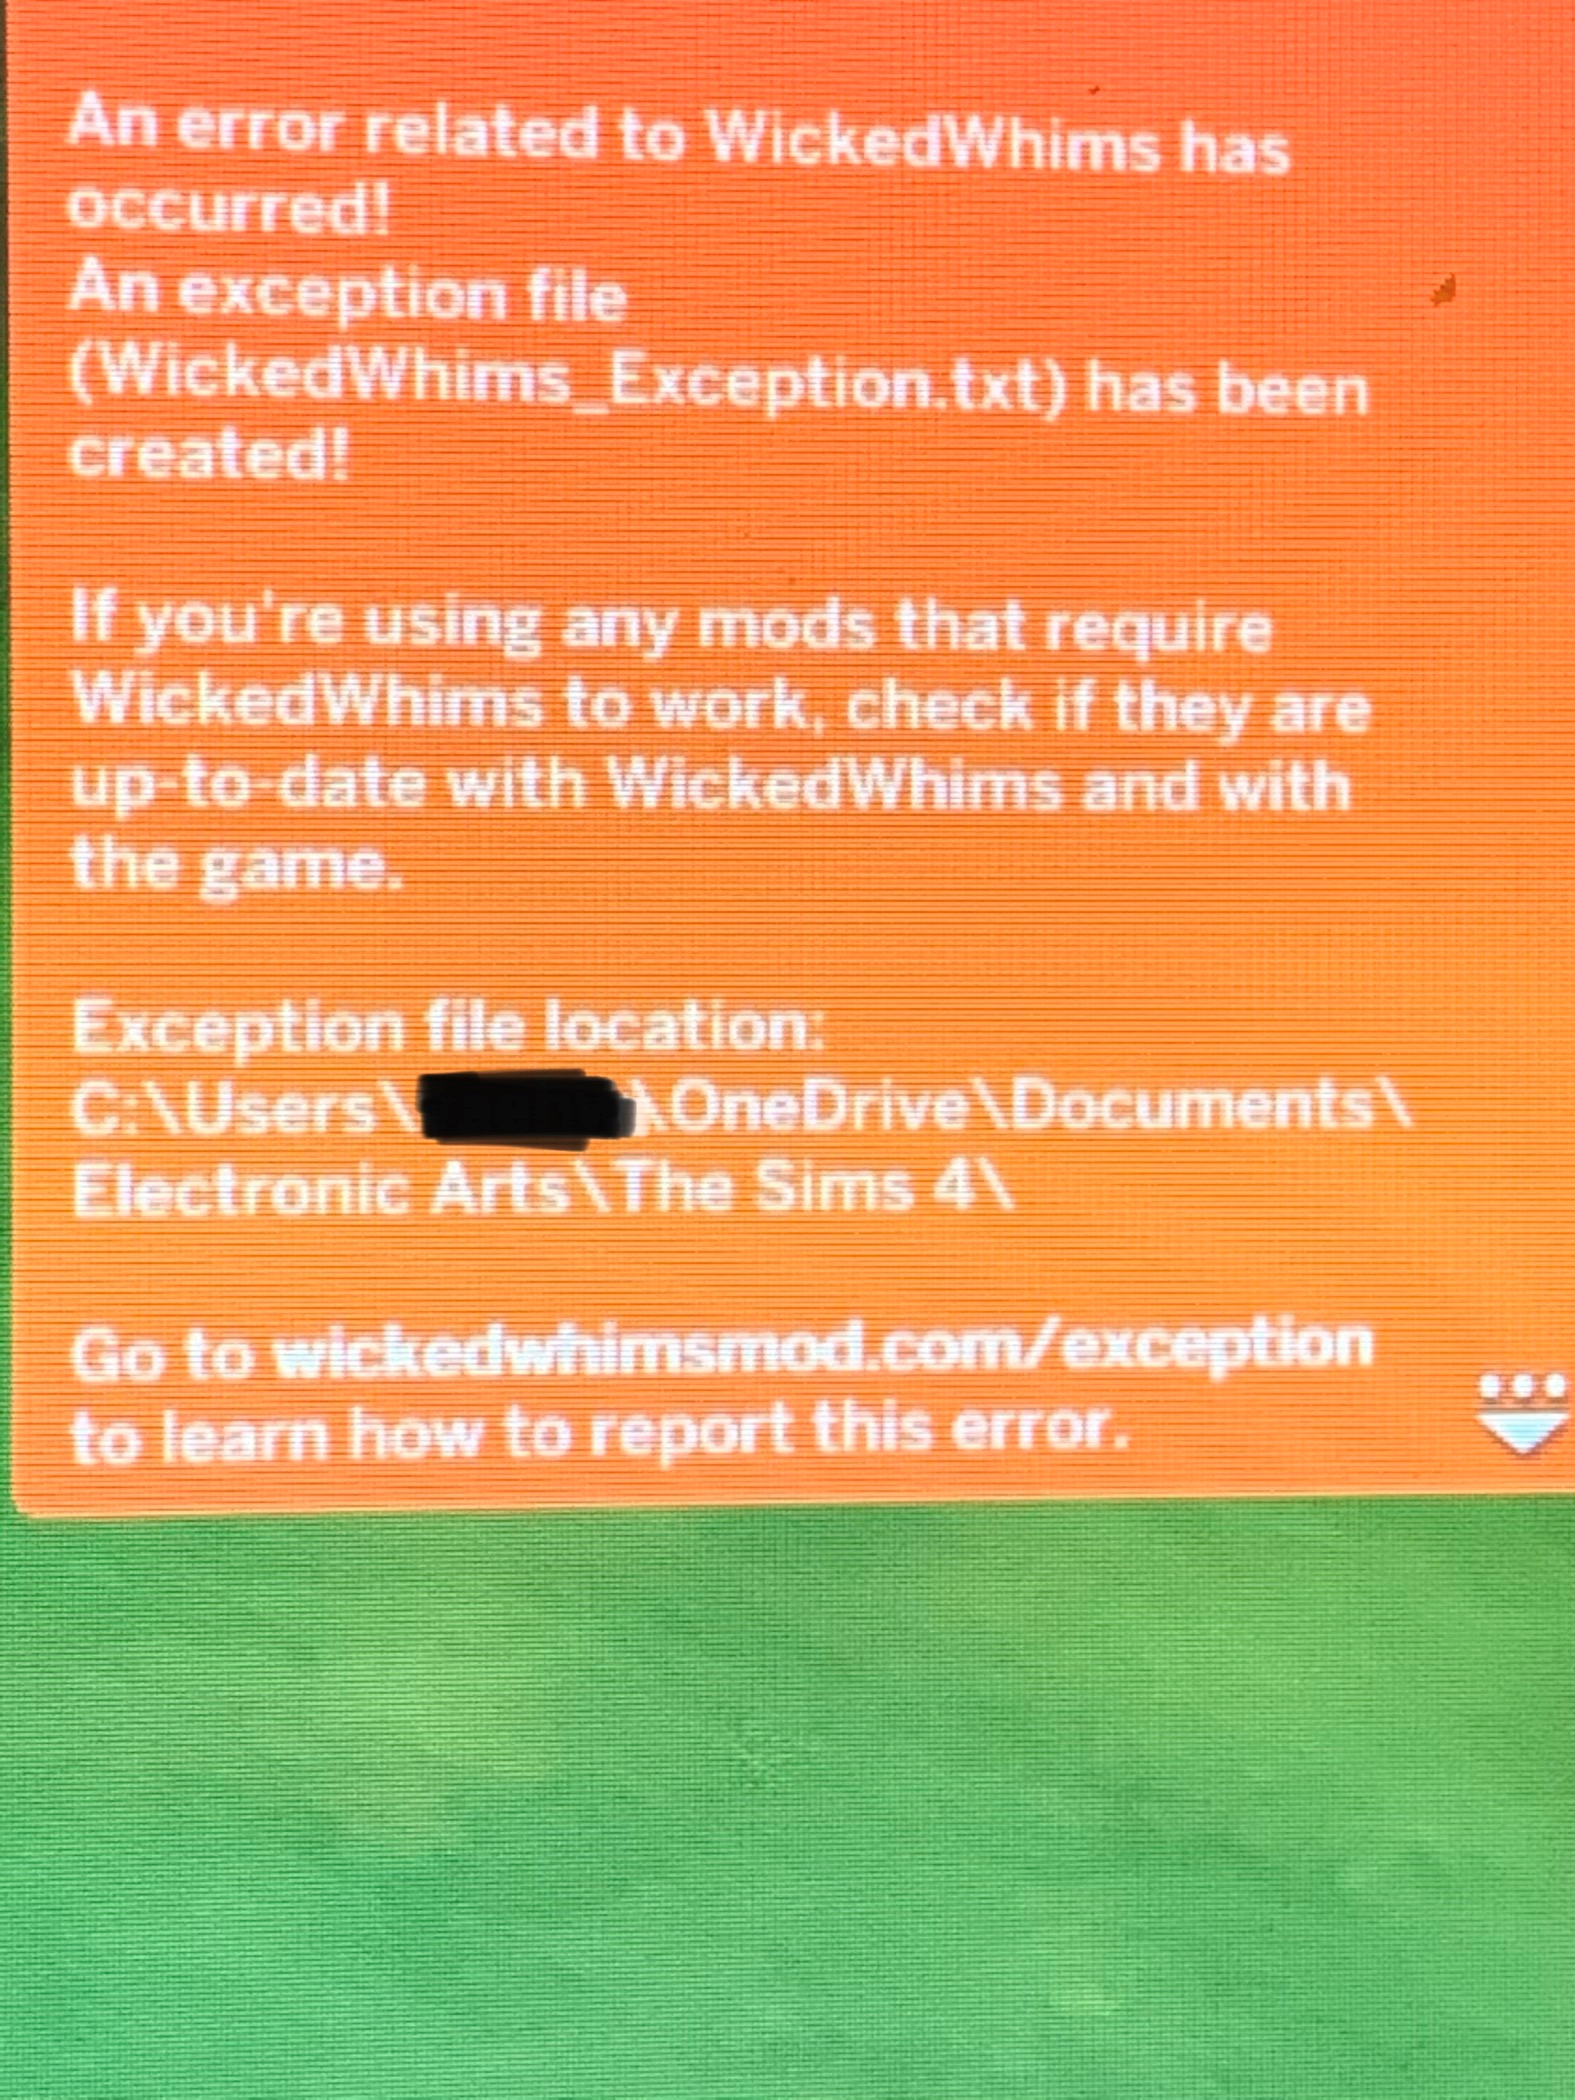 Exception txt. Ошибка wickedwhims_exception.txt. Wicked whims ошибка. Критическая ошибка wickedwhims. Wickedwhims ошибка exception.